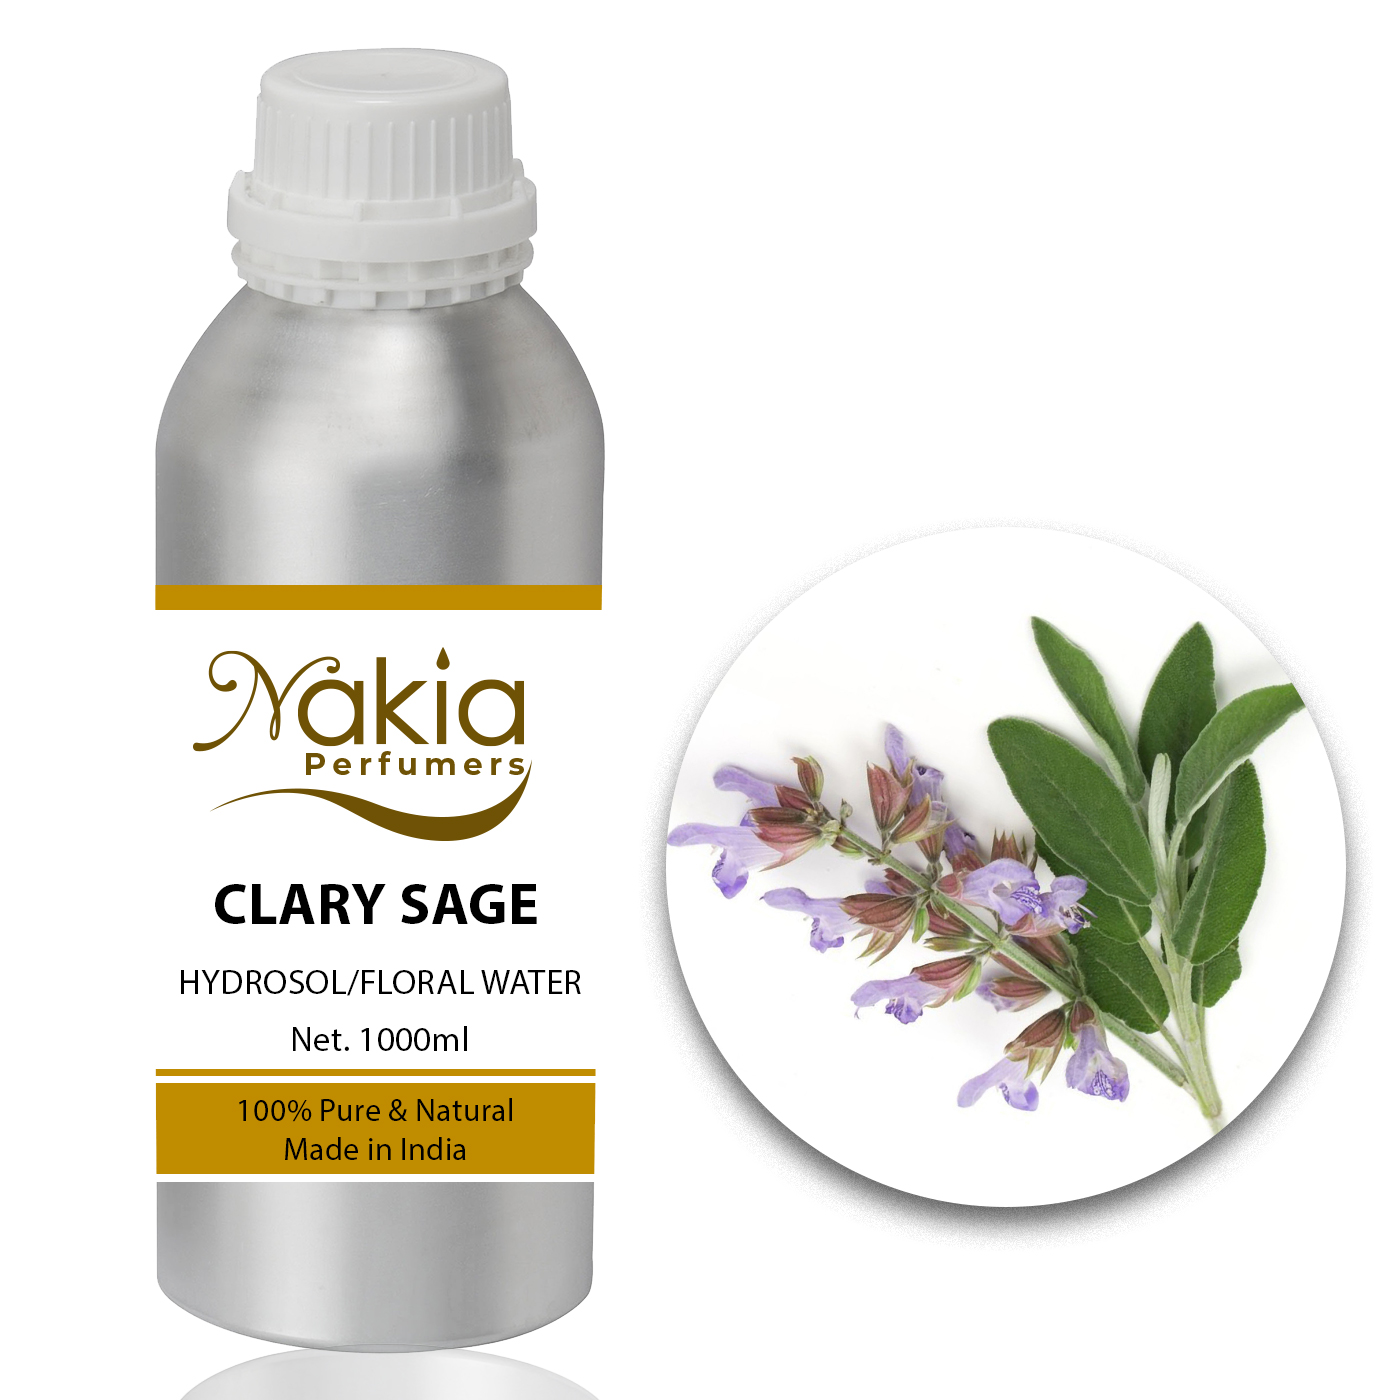 CLARY-SAGE FLORAL WATER/HYDROSOL